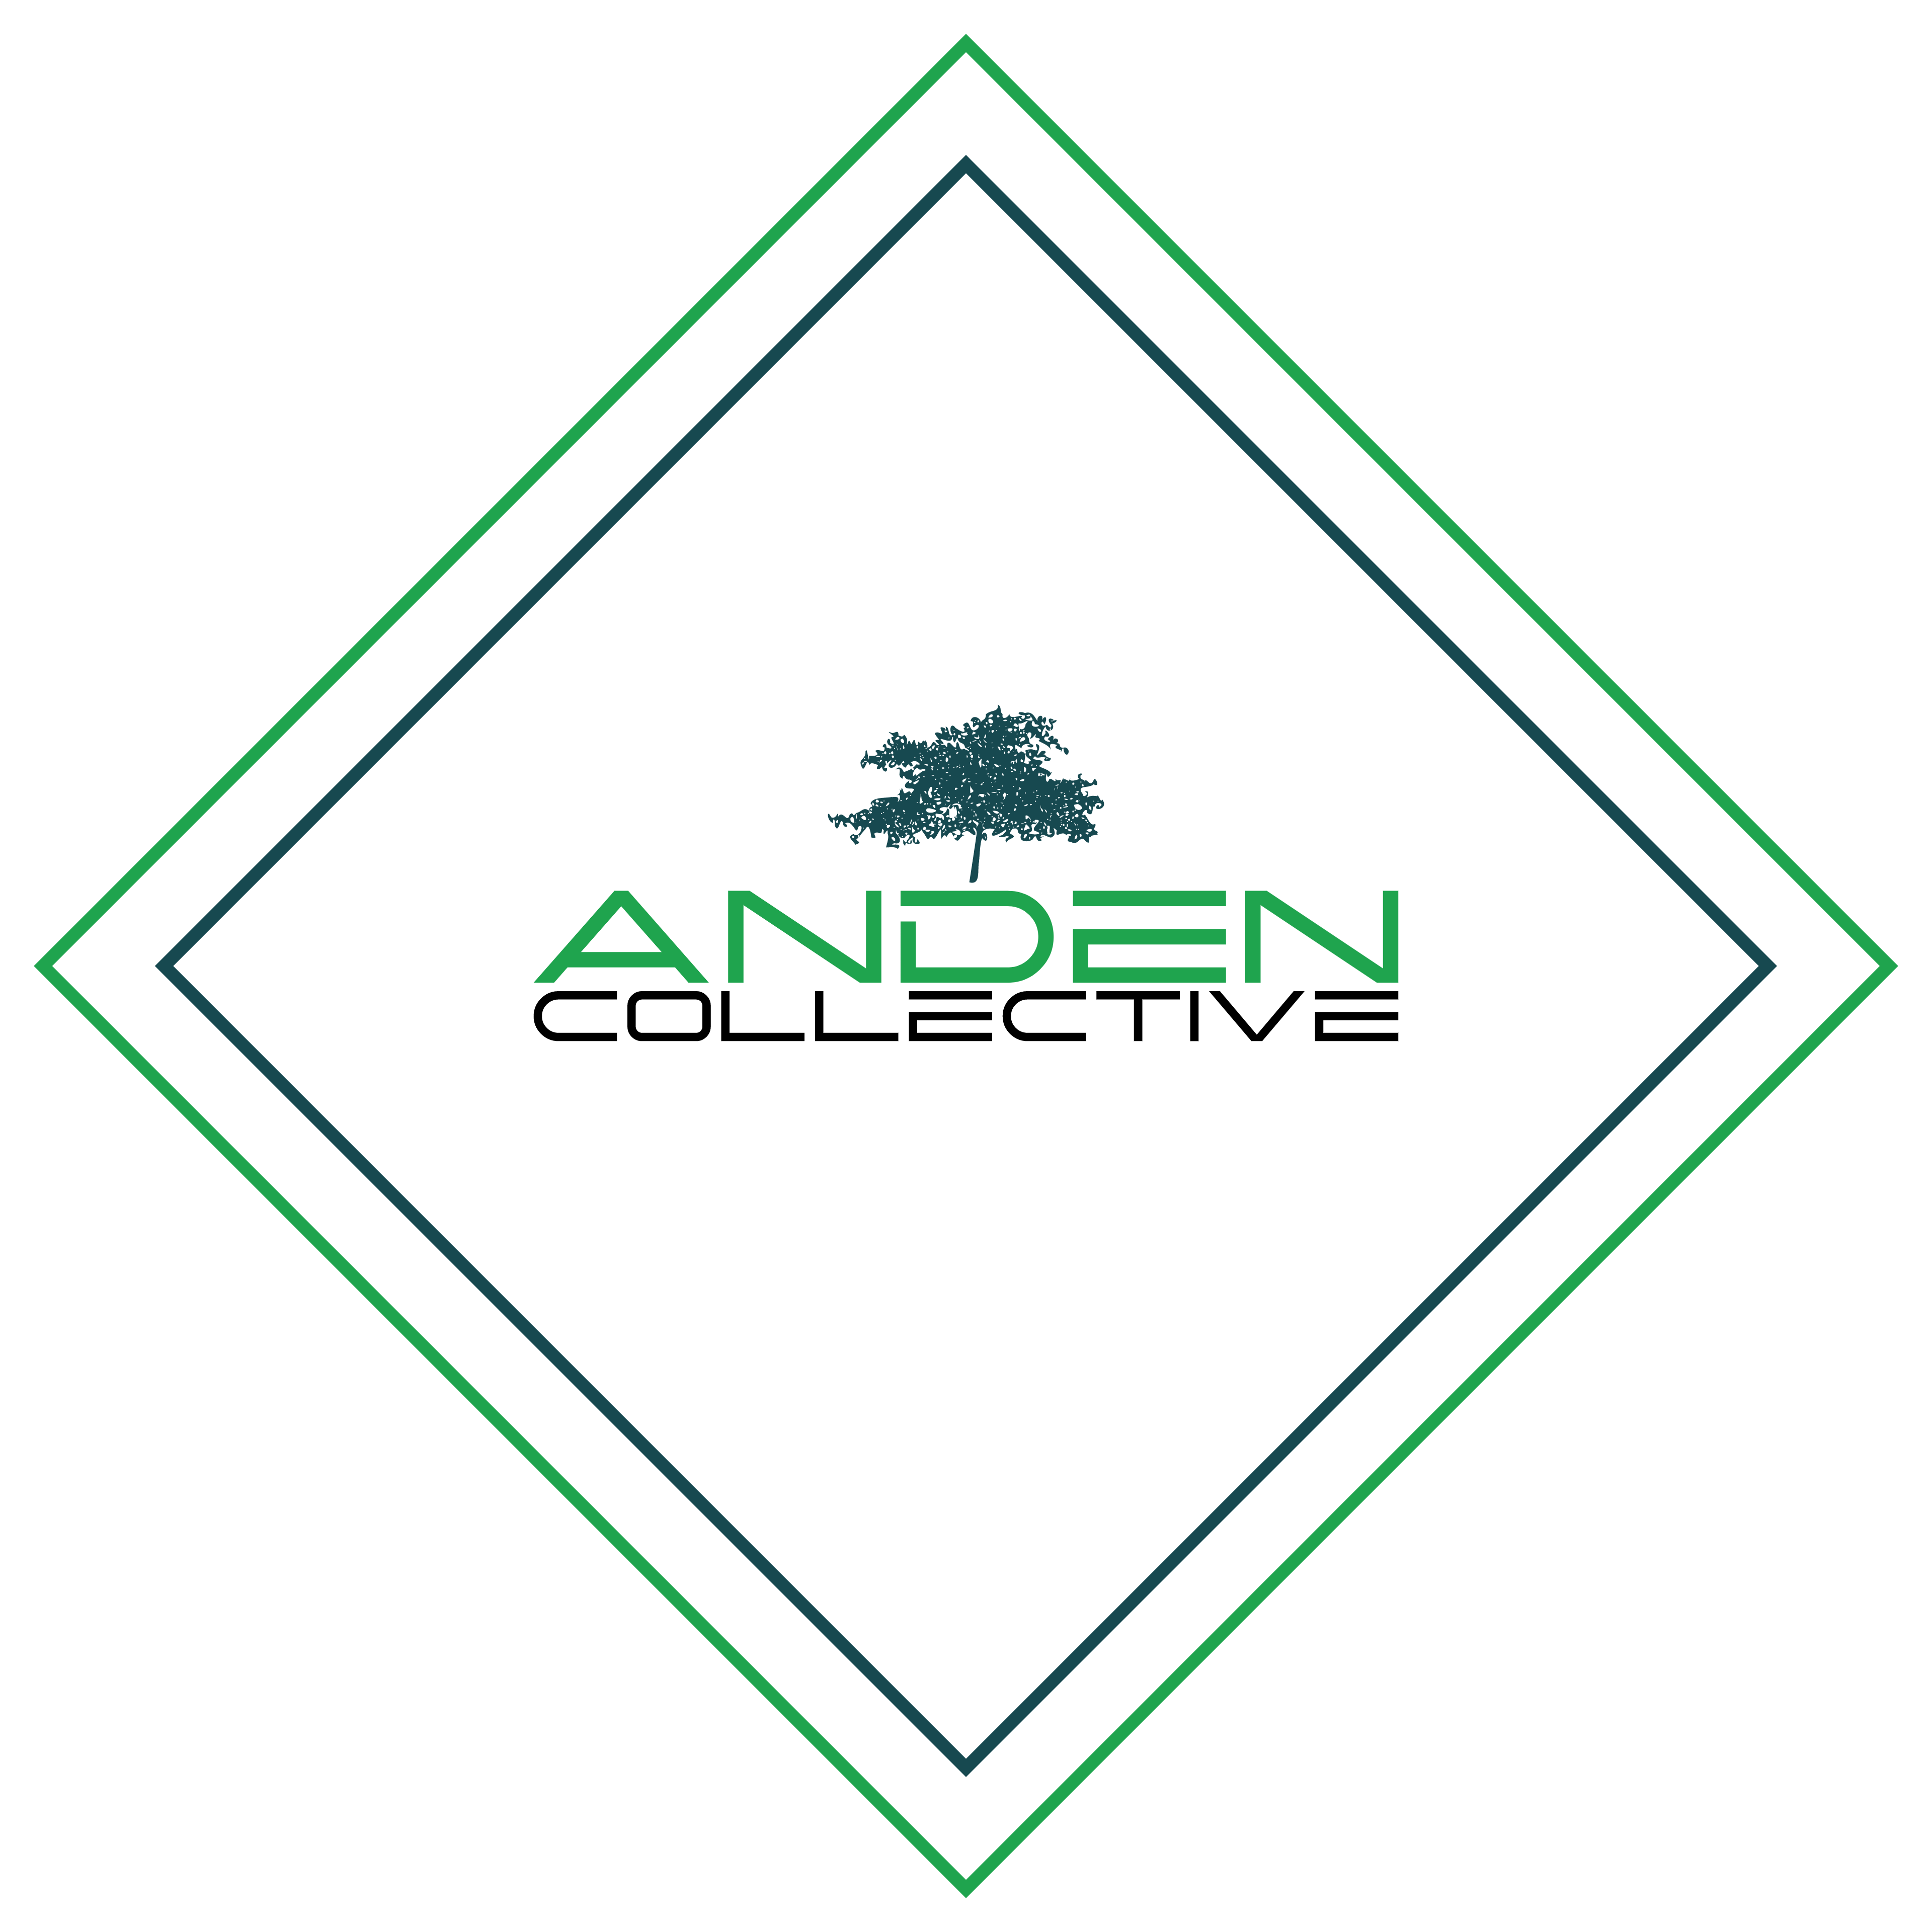 Anden Collective